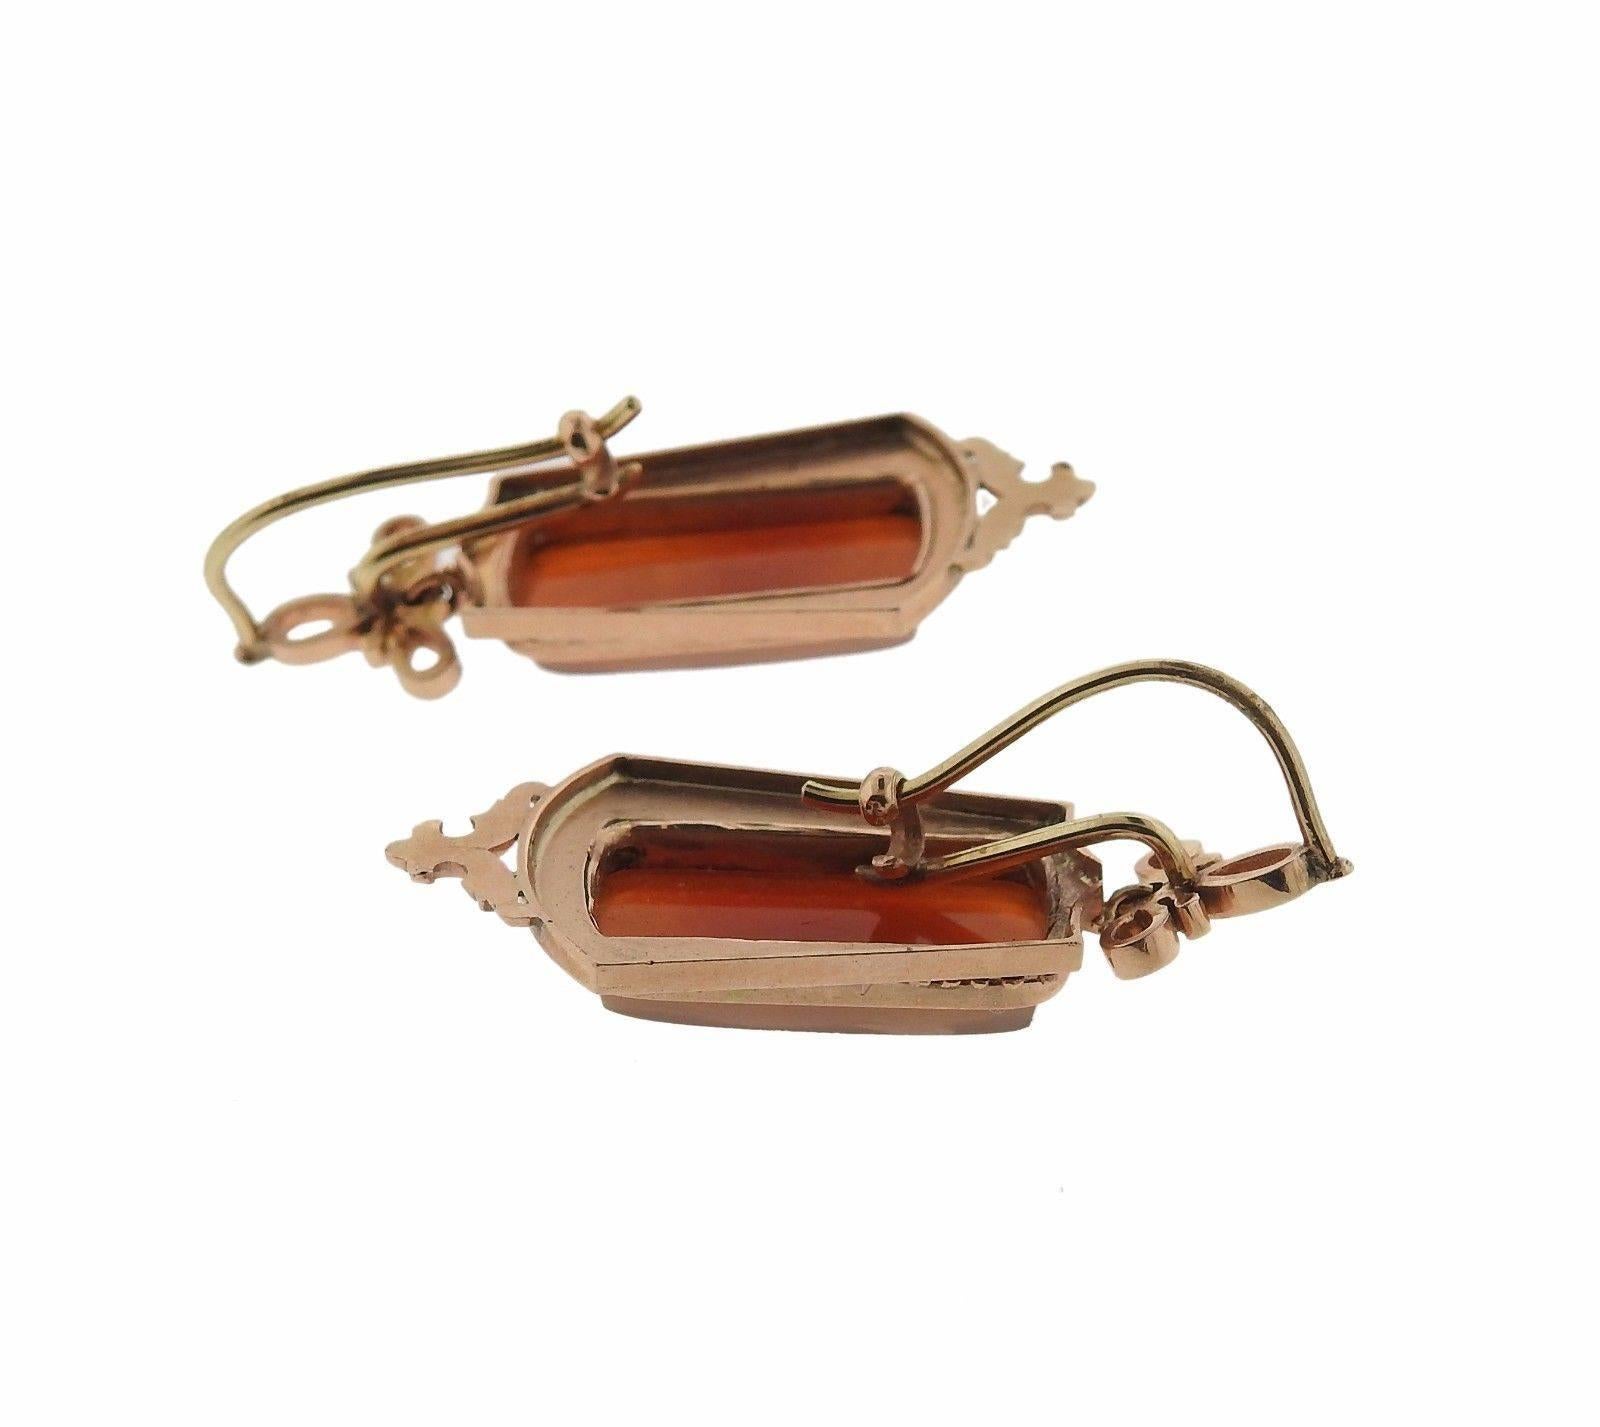 A pair of 14k rose gold earrings adorned with hardstone cameos.  The earrings are 39mm x 17mm and weigh 9.8 grams.